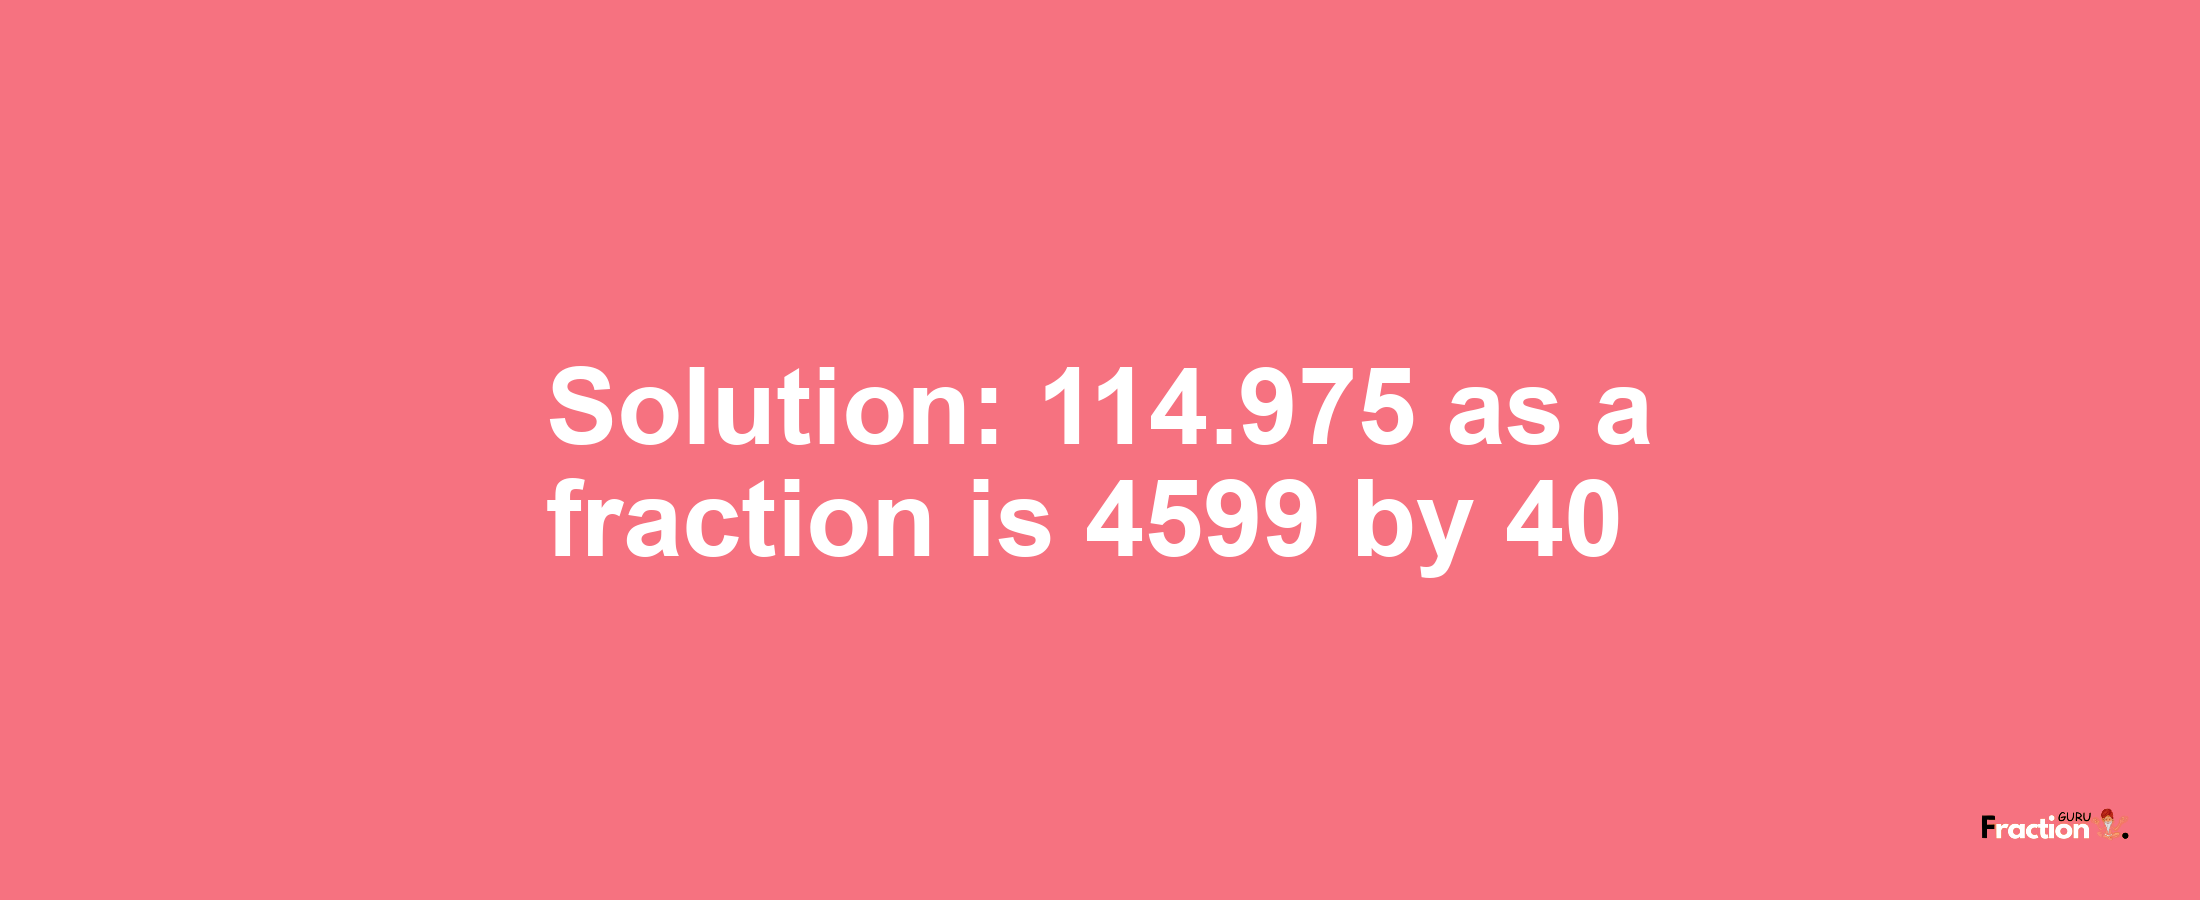 Solution:114.975 as a fraction is 4599/40